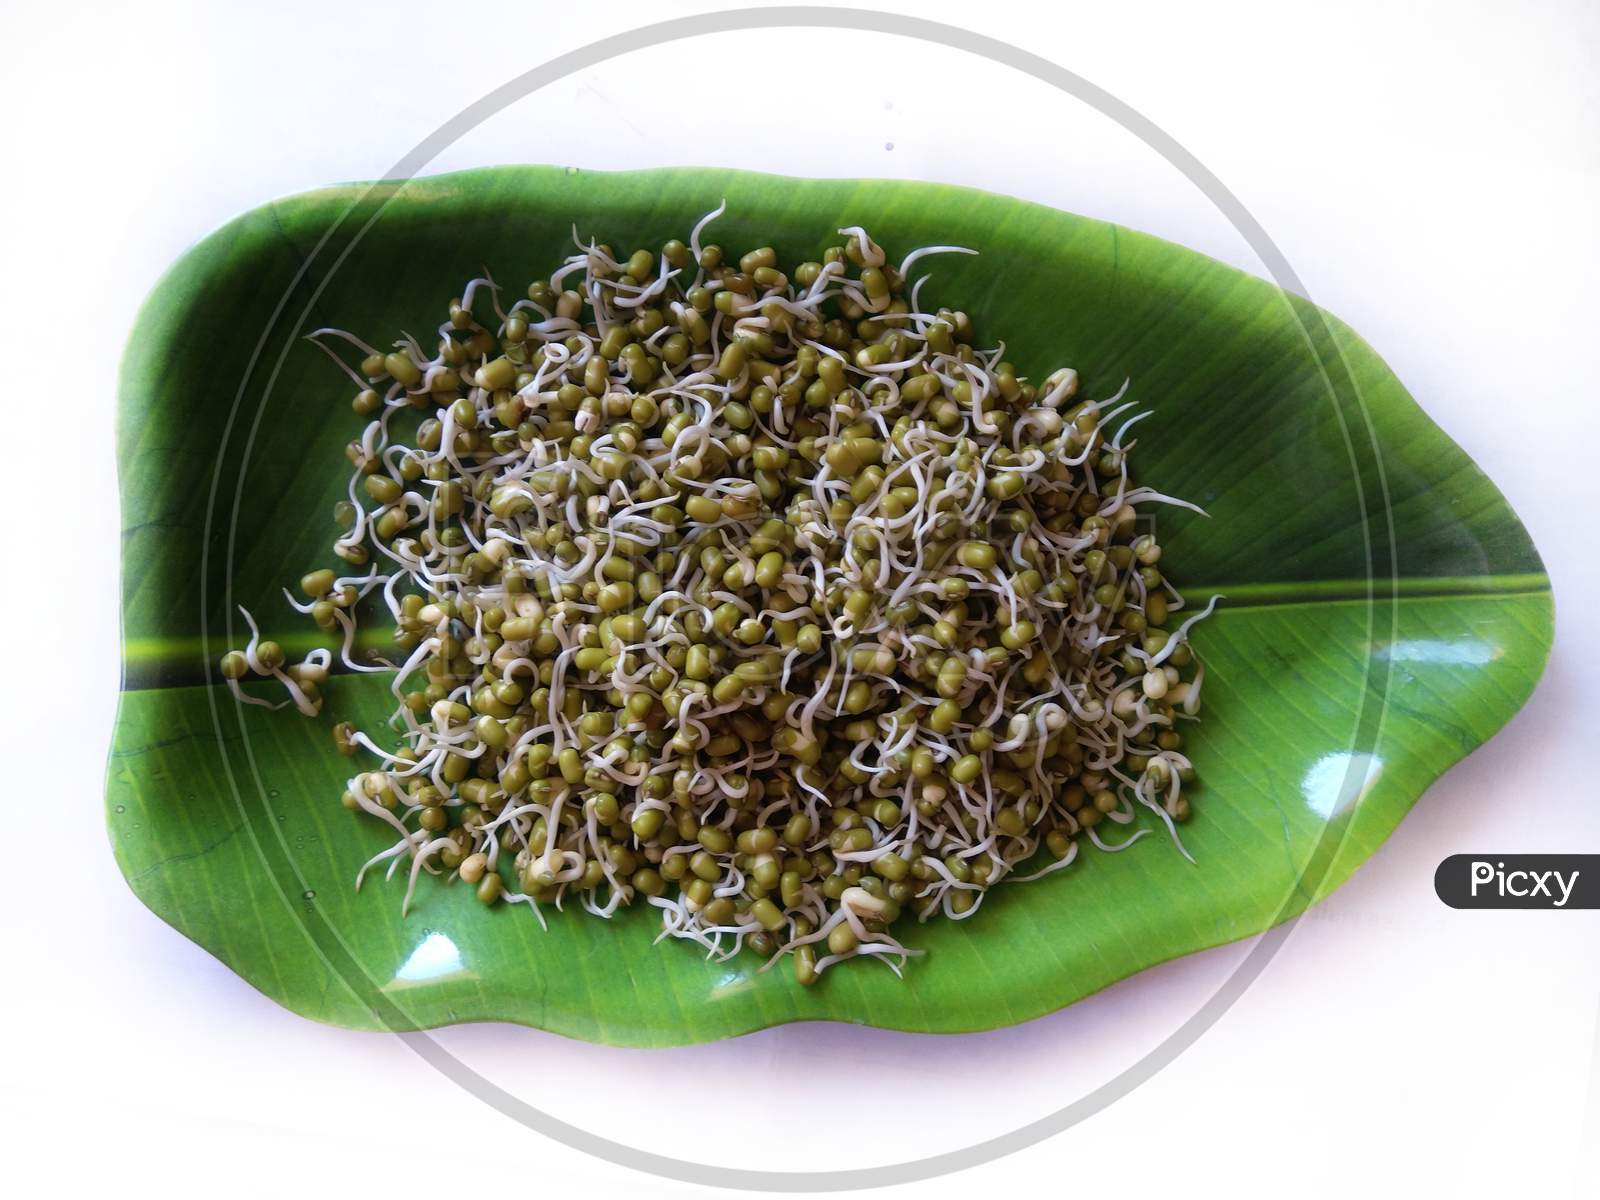 Sprouted moong, mung or green gram, organic type, a healthy vegetarian food in bowl, high protein diet.